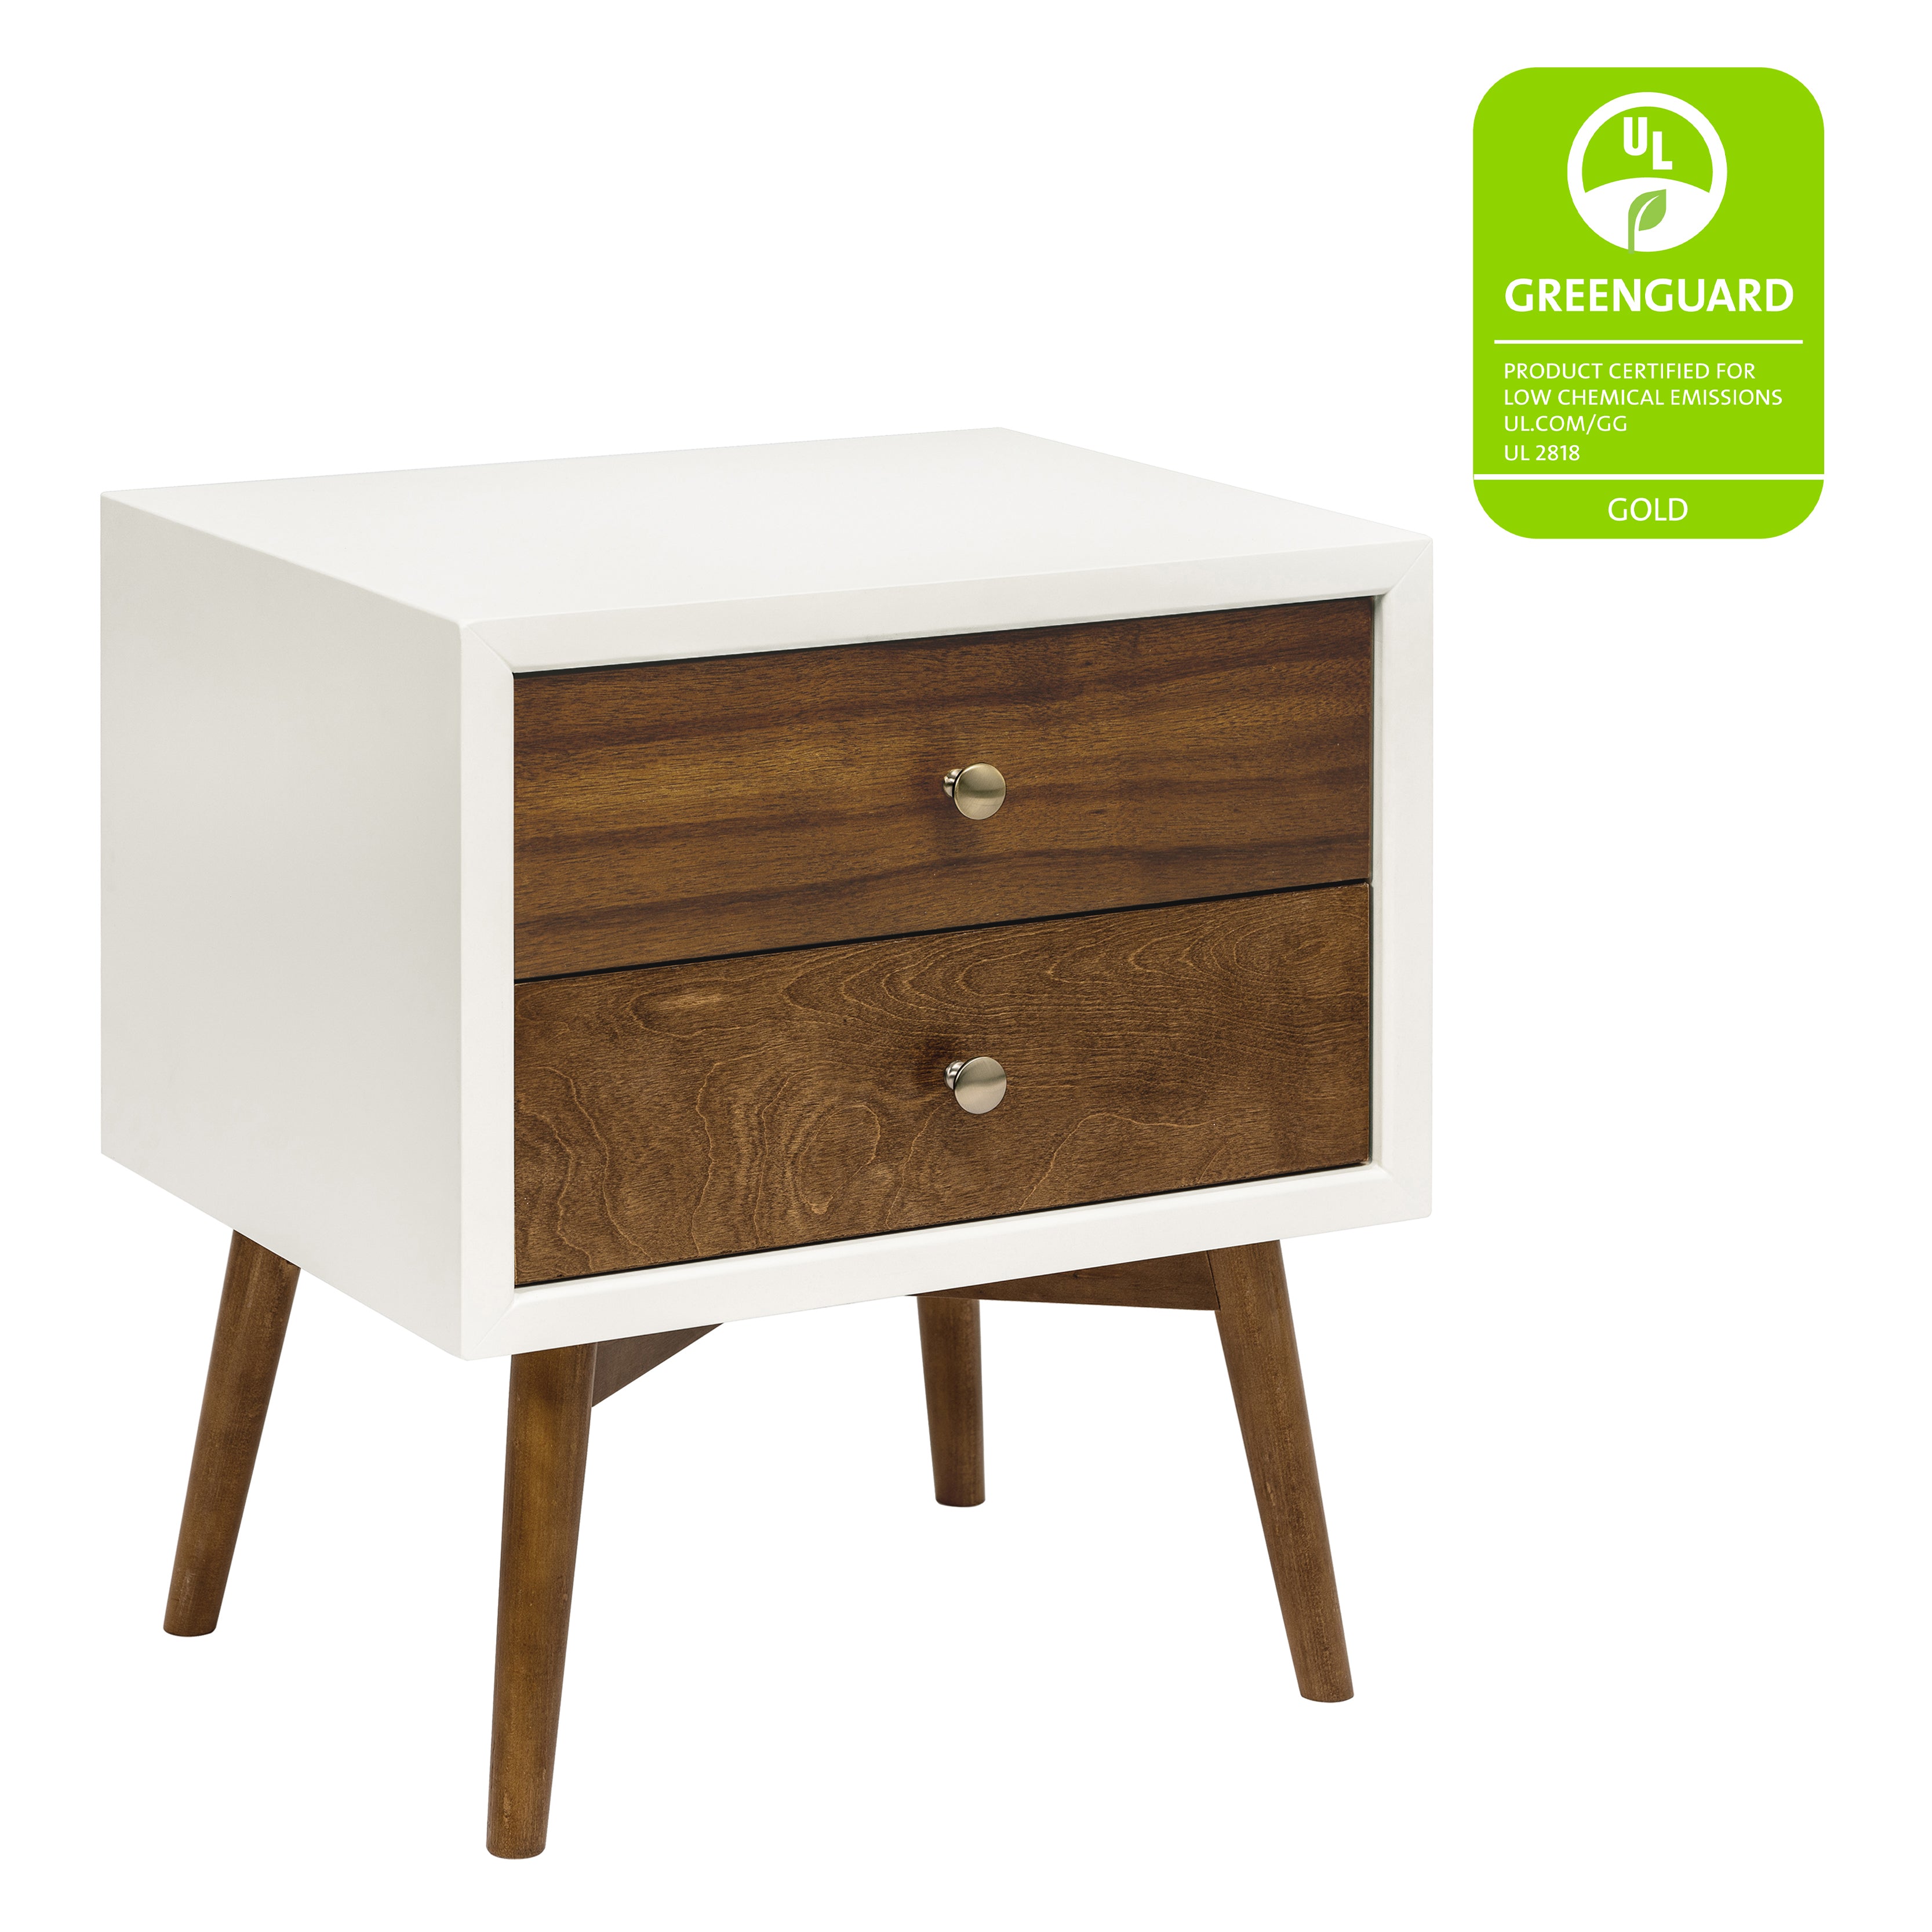 Babyletto Palma Nightstand with USB Port